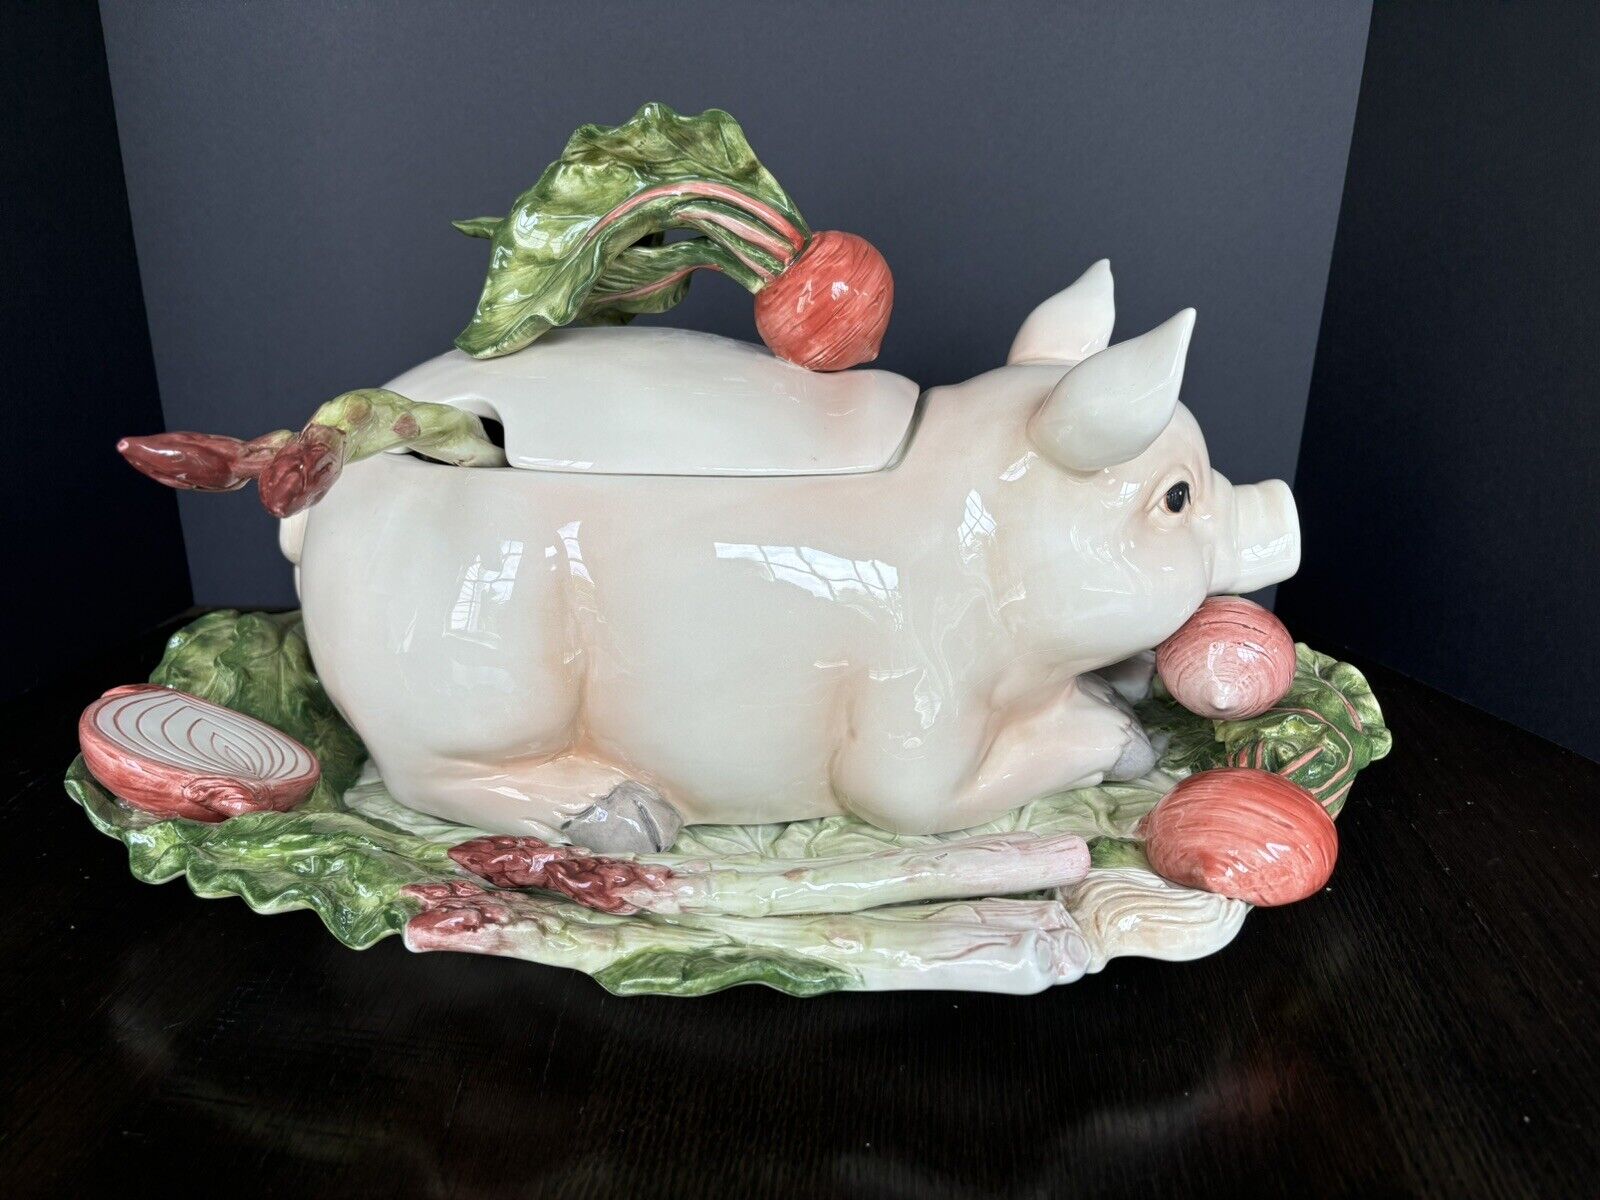 Vintage Fitz and Floyd French Market Pig Tureen with Platter and Ladle